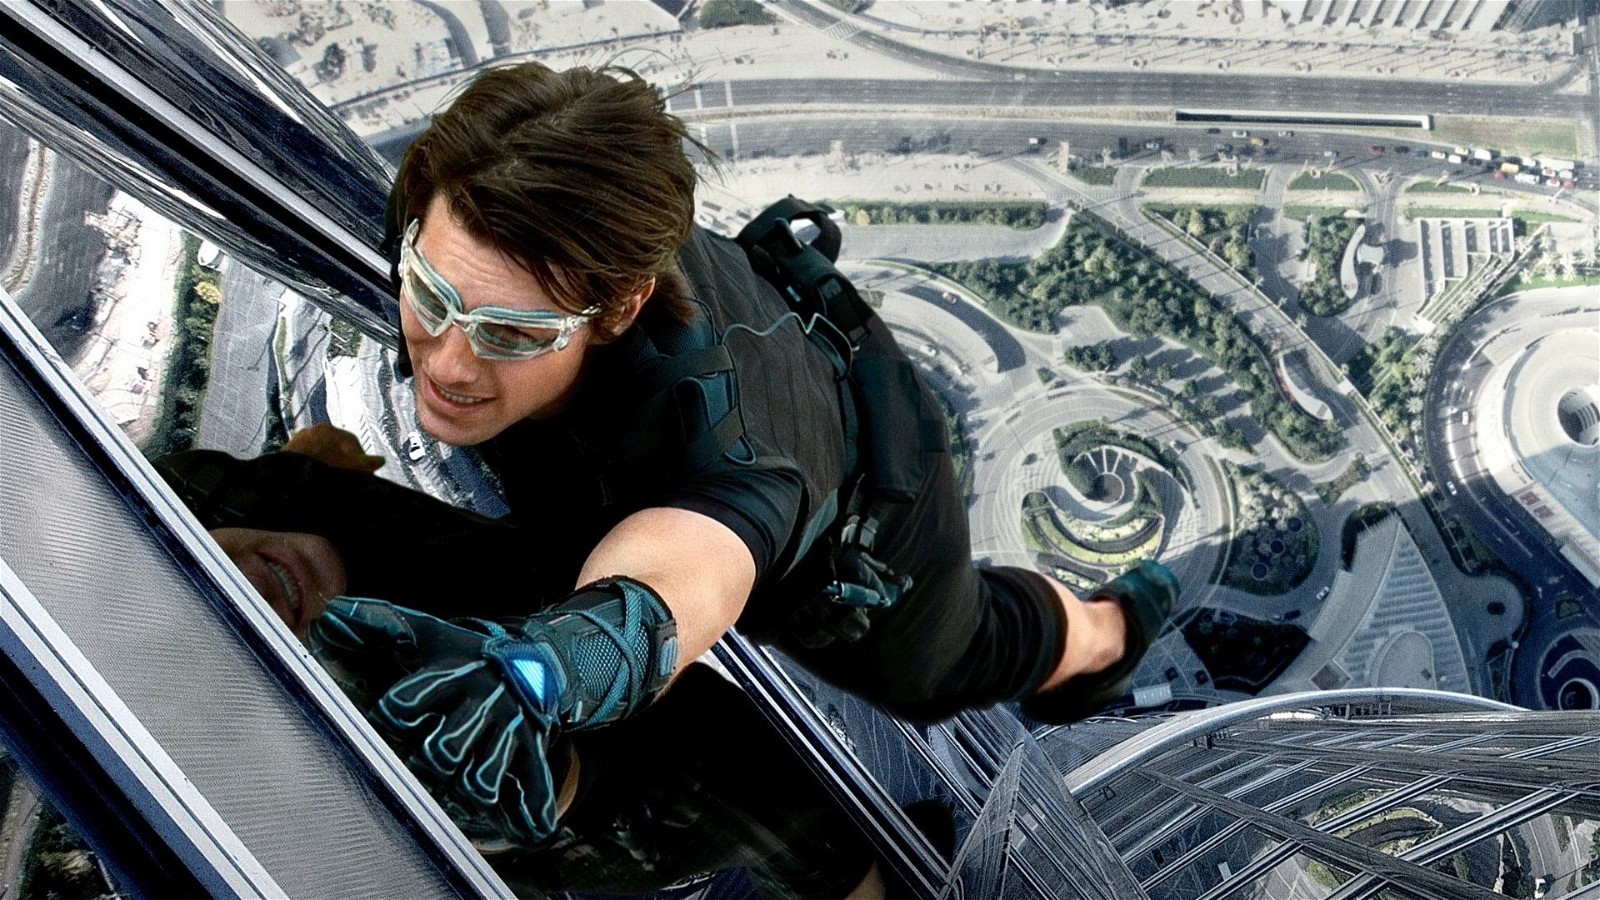 Tom Cruise in a still from Mission: Impossible: Ghost Protocol